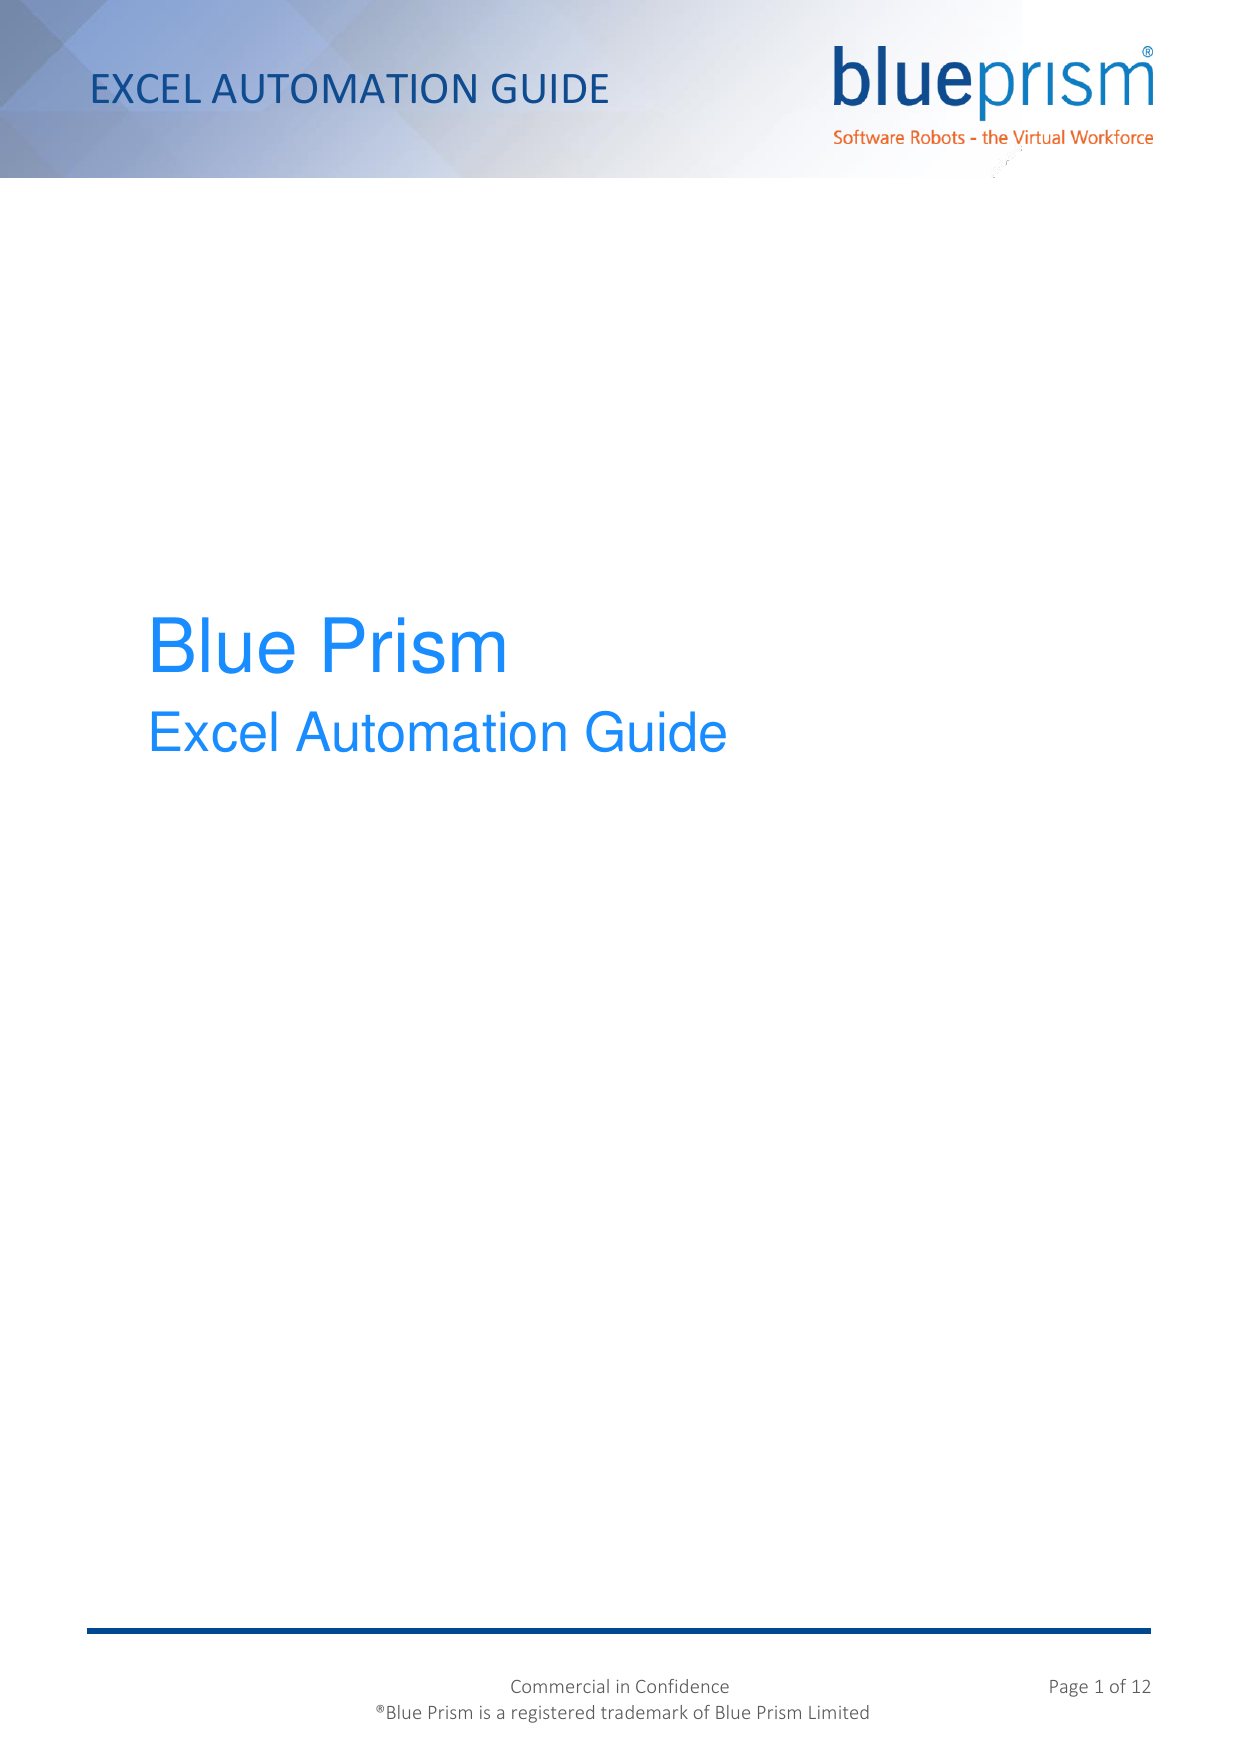 Page 1 of 12 - Blue Prism Excel Automation Guide